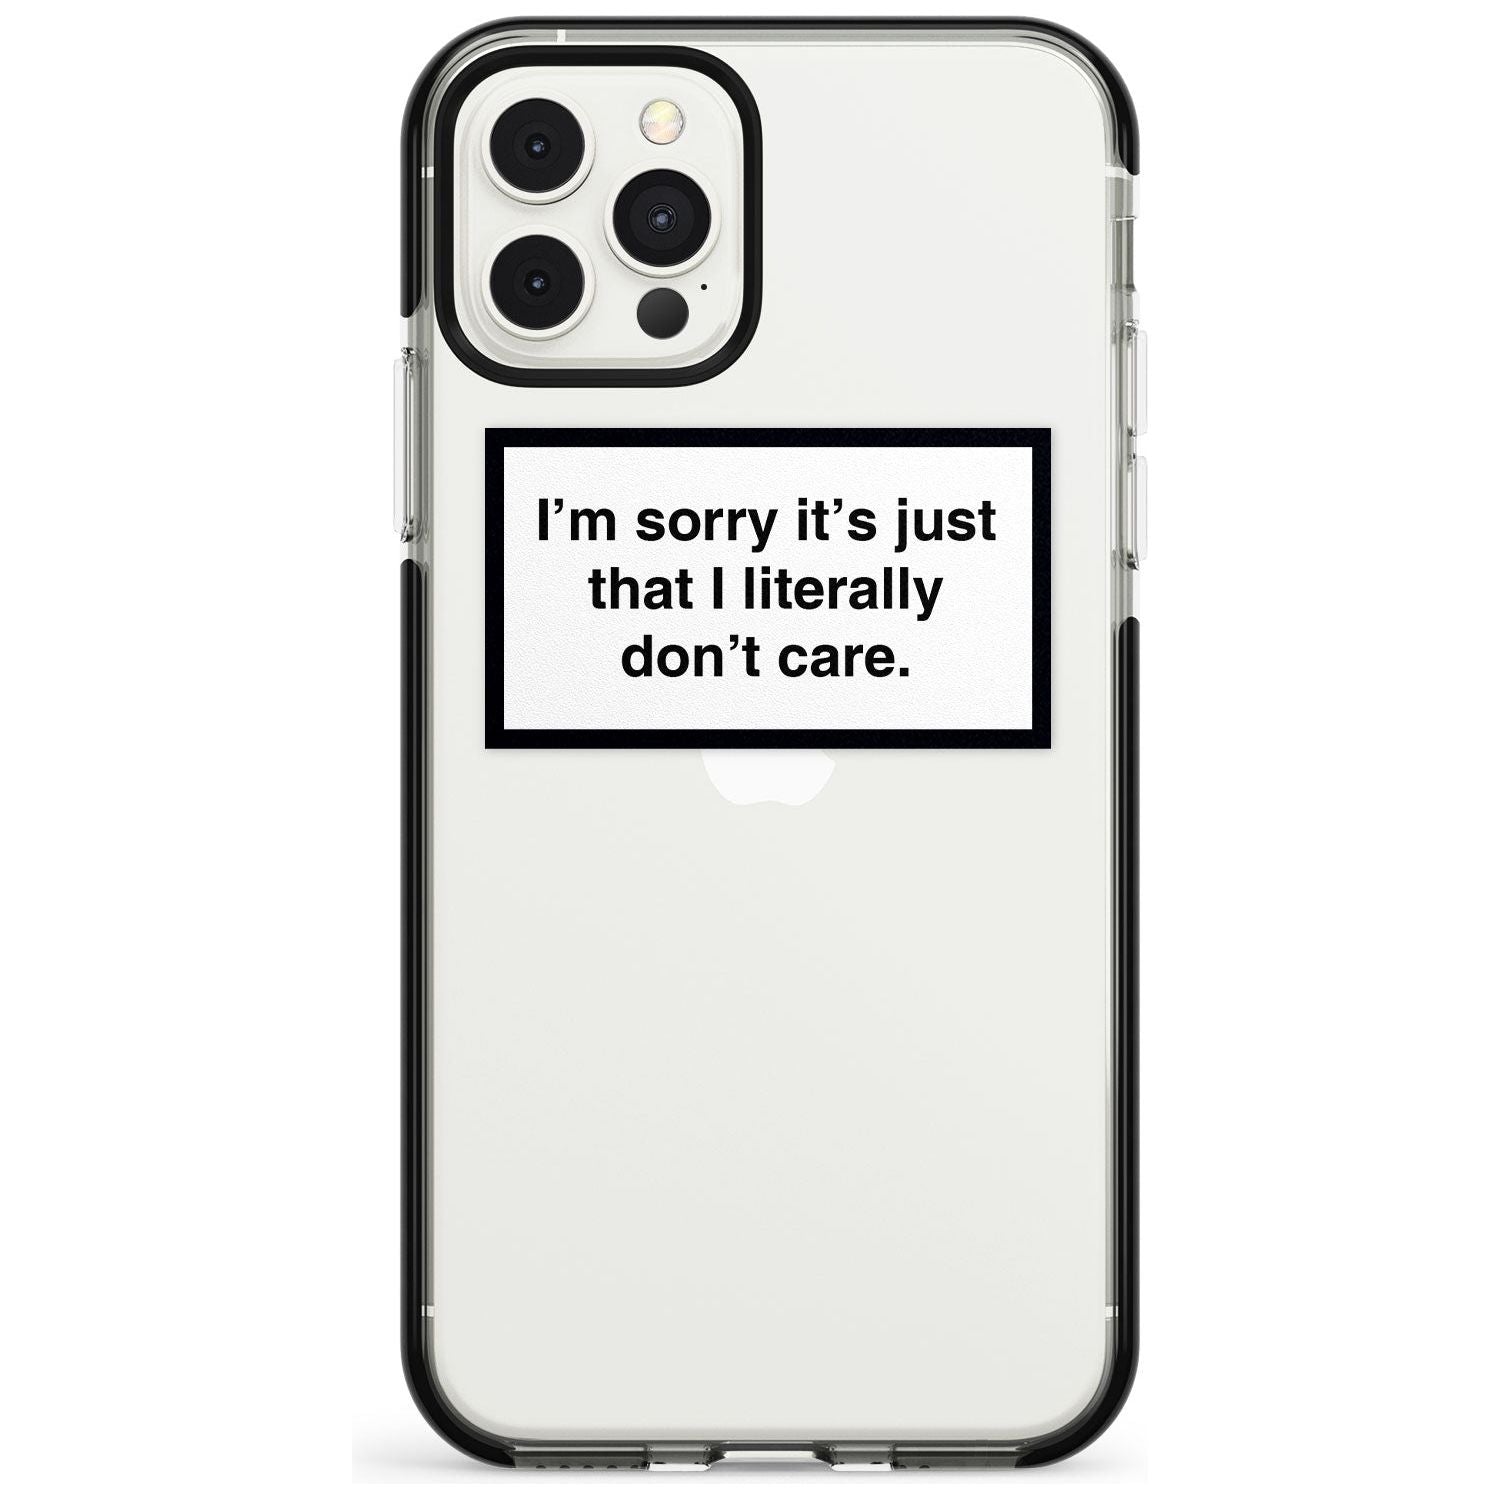 I'm sorry it's just that I literally don't care Pink Fade Impact Phone Case for iPhone 11